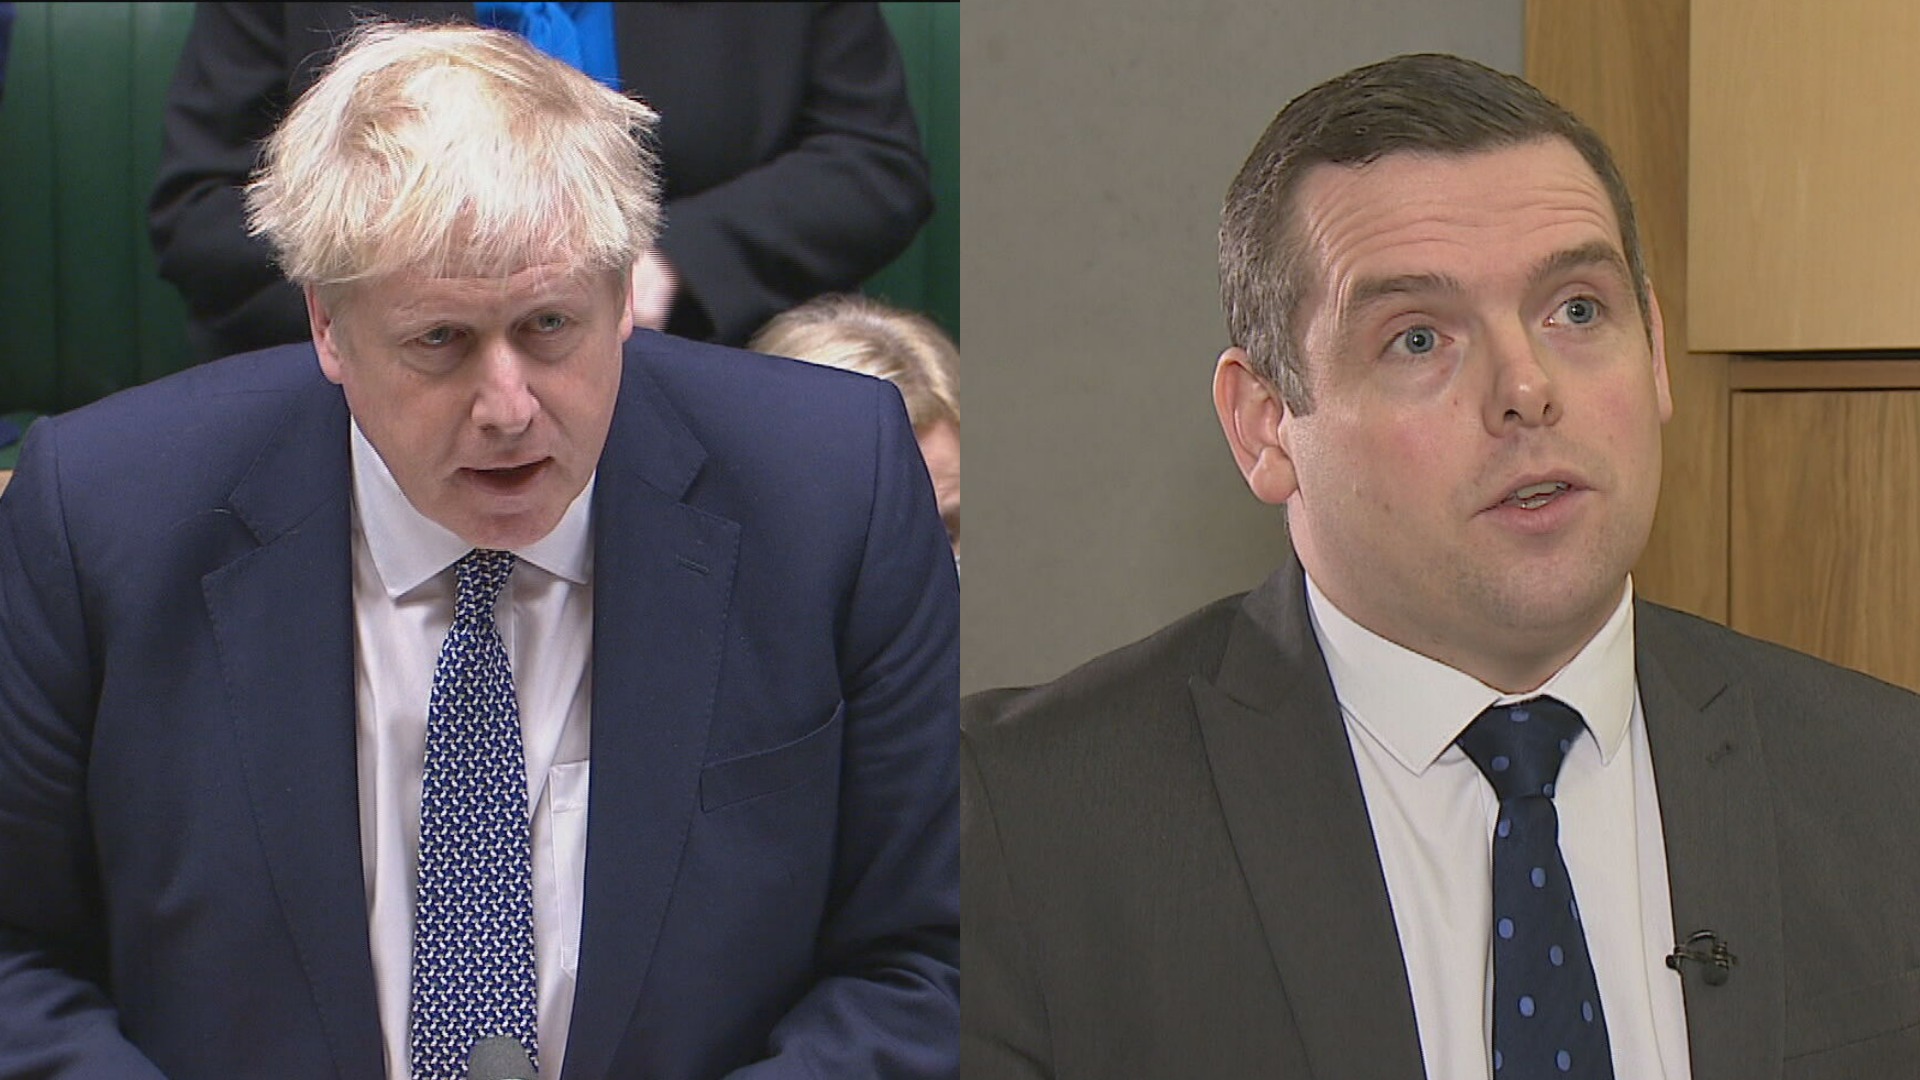 Douglas Ross called on the Prime Minister to resign.